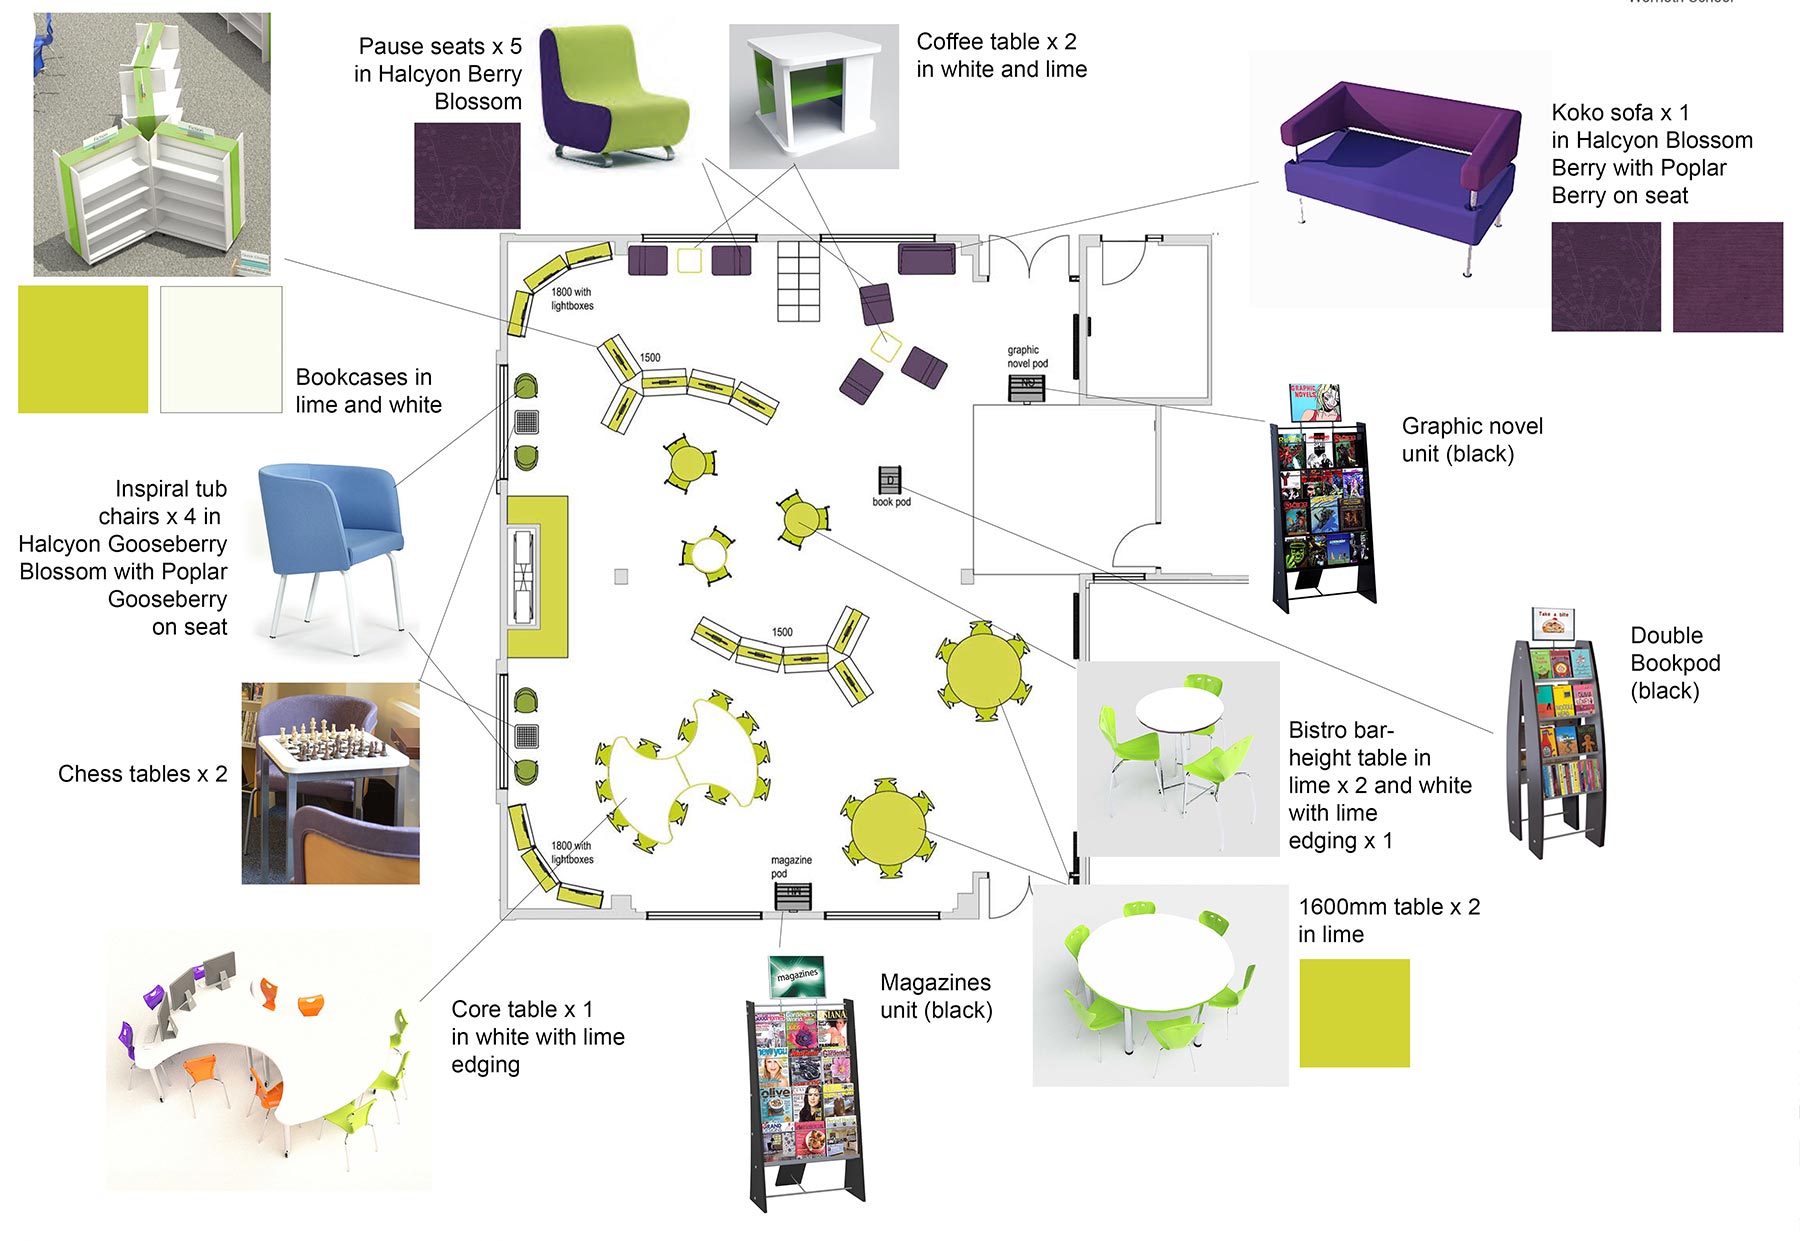 Layout of library and furnishings